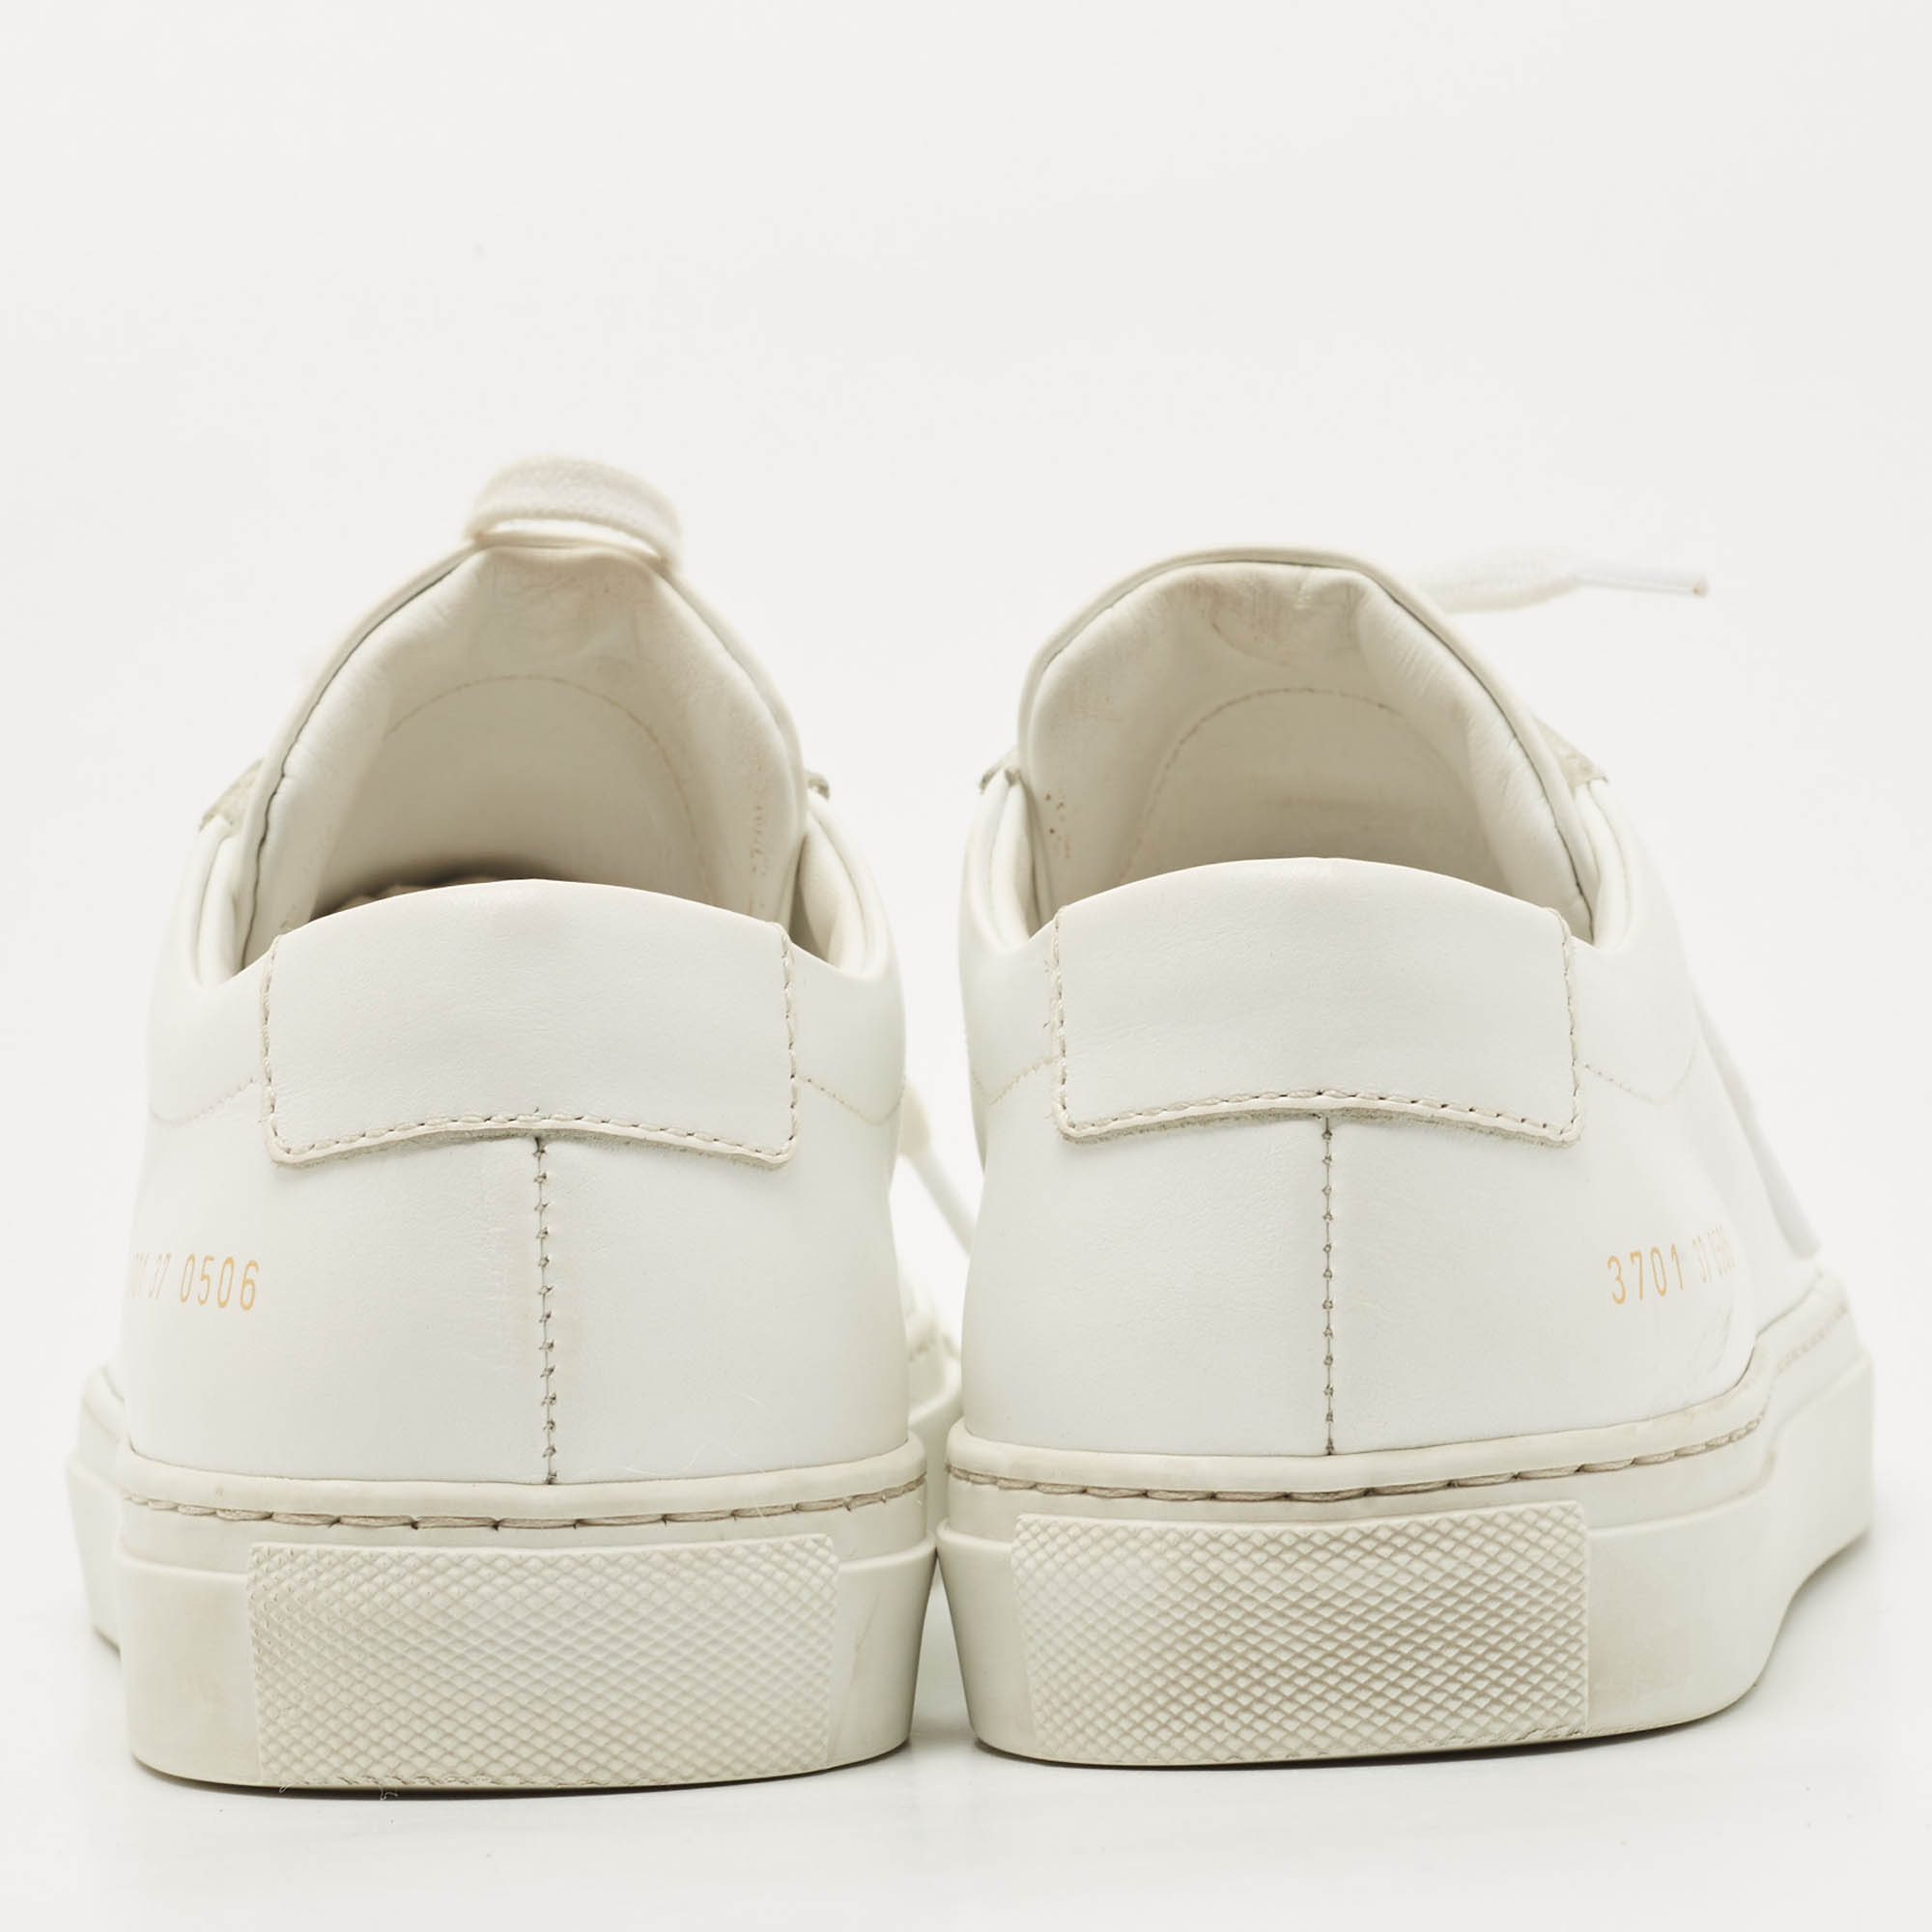 Common Projects White Leather Achilles Sneakers Size 37